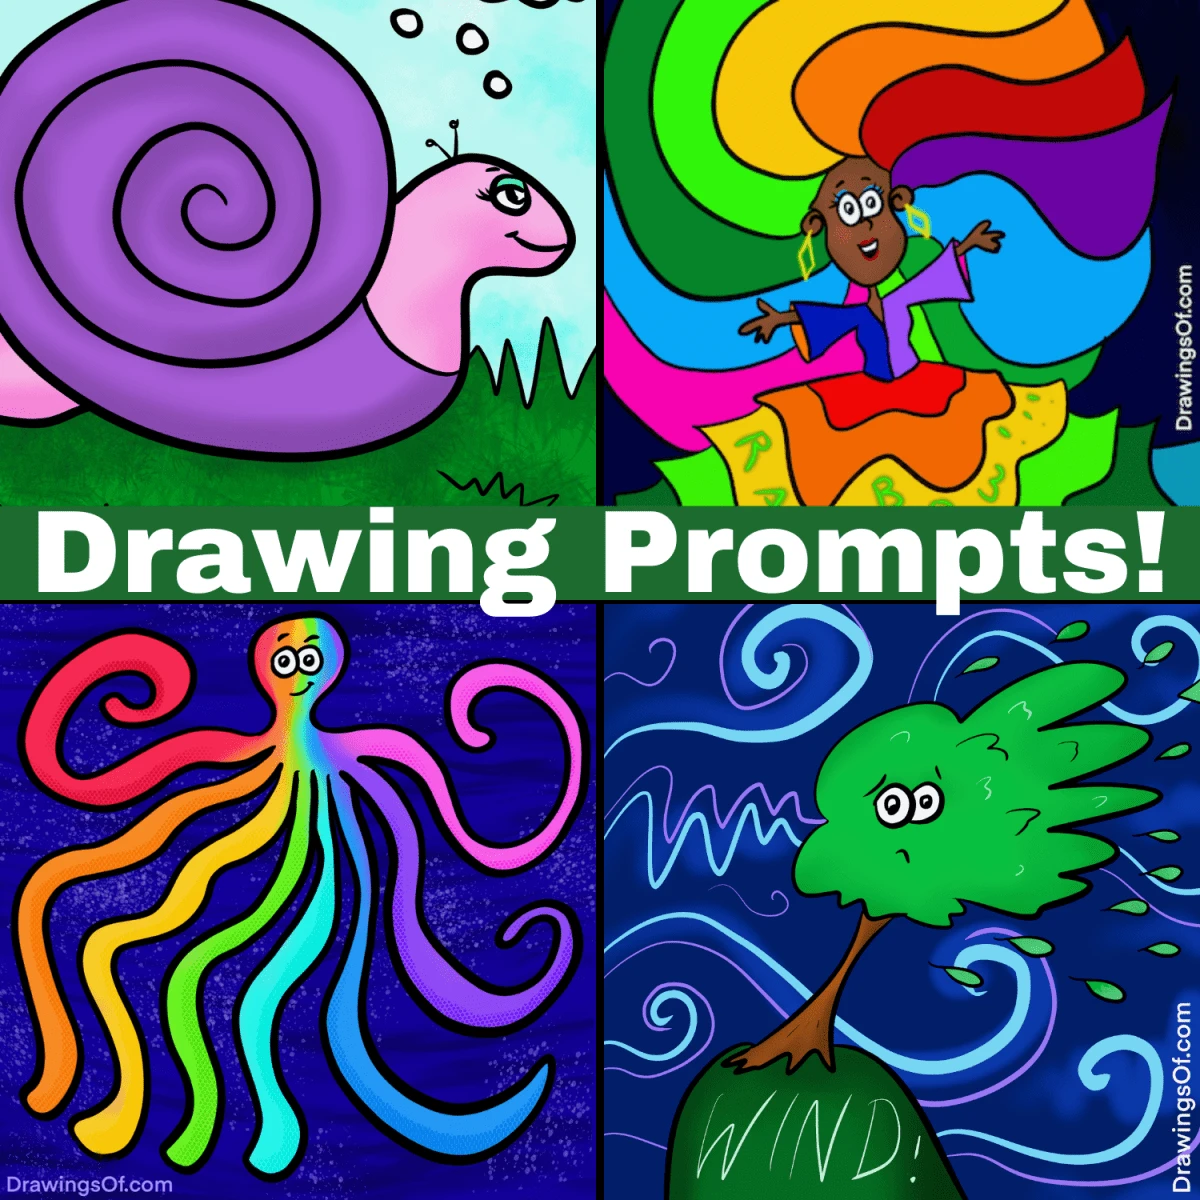 Drawing prompts